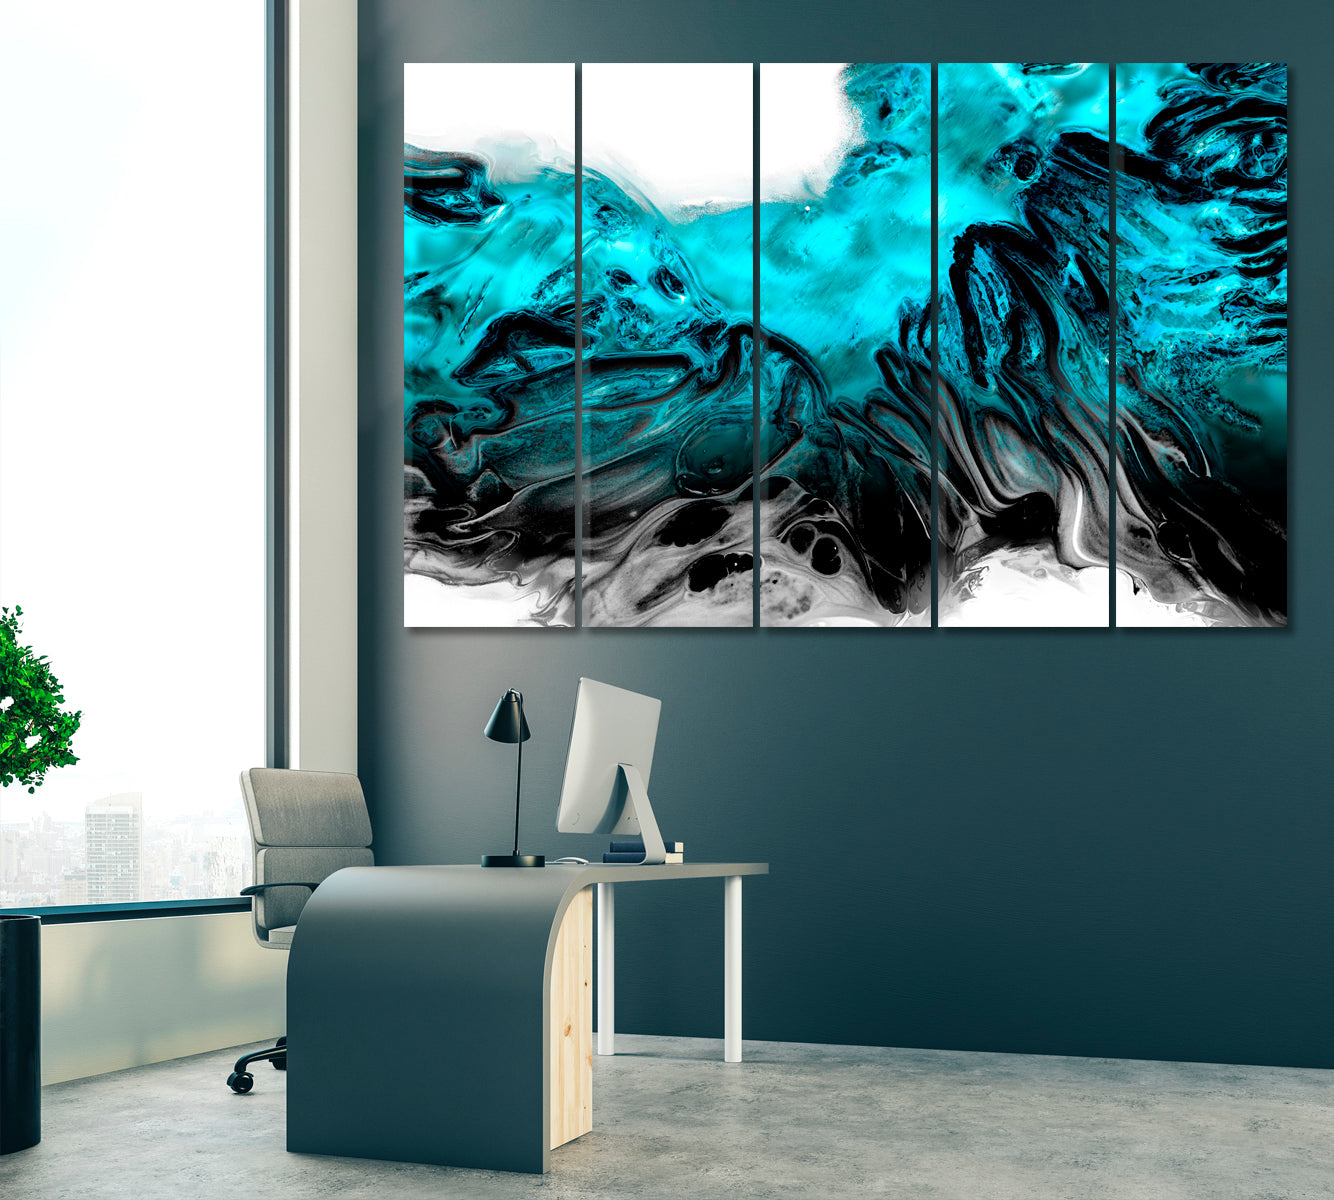 Marble Abstract Acrylic Pattern Canvas Print ArtLexy 5 Panels 36"x24" inches 